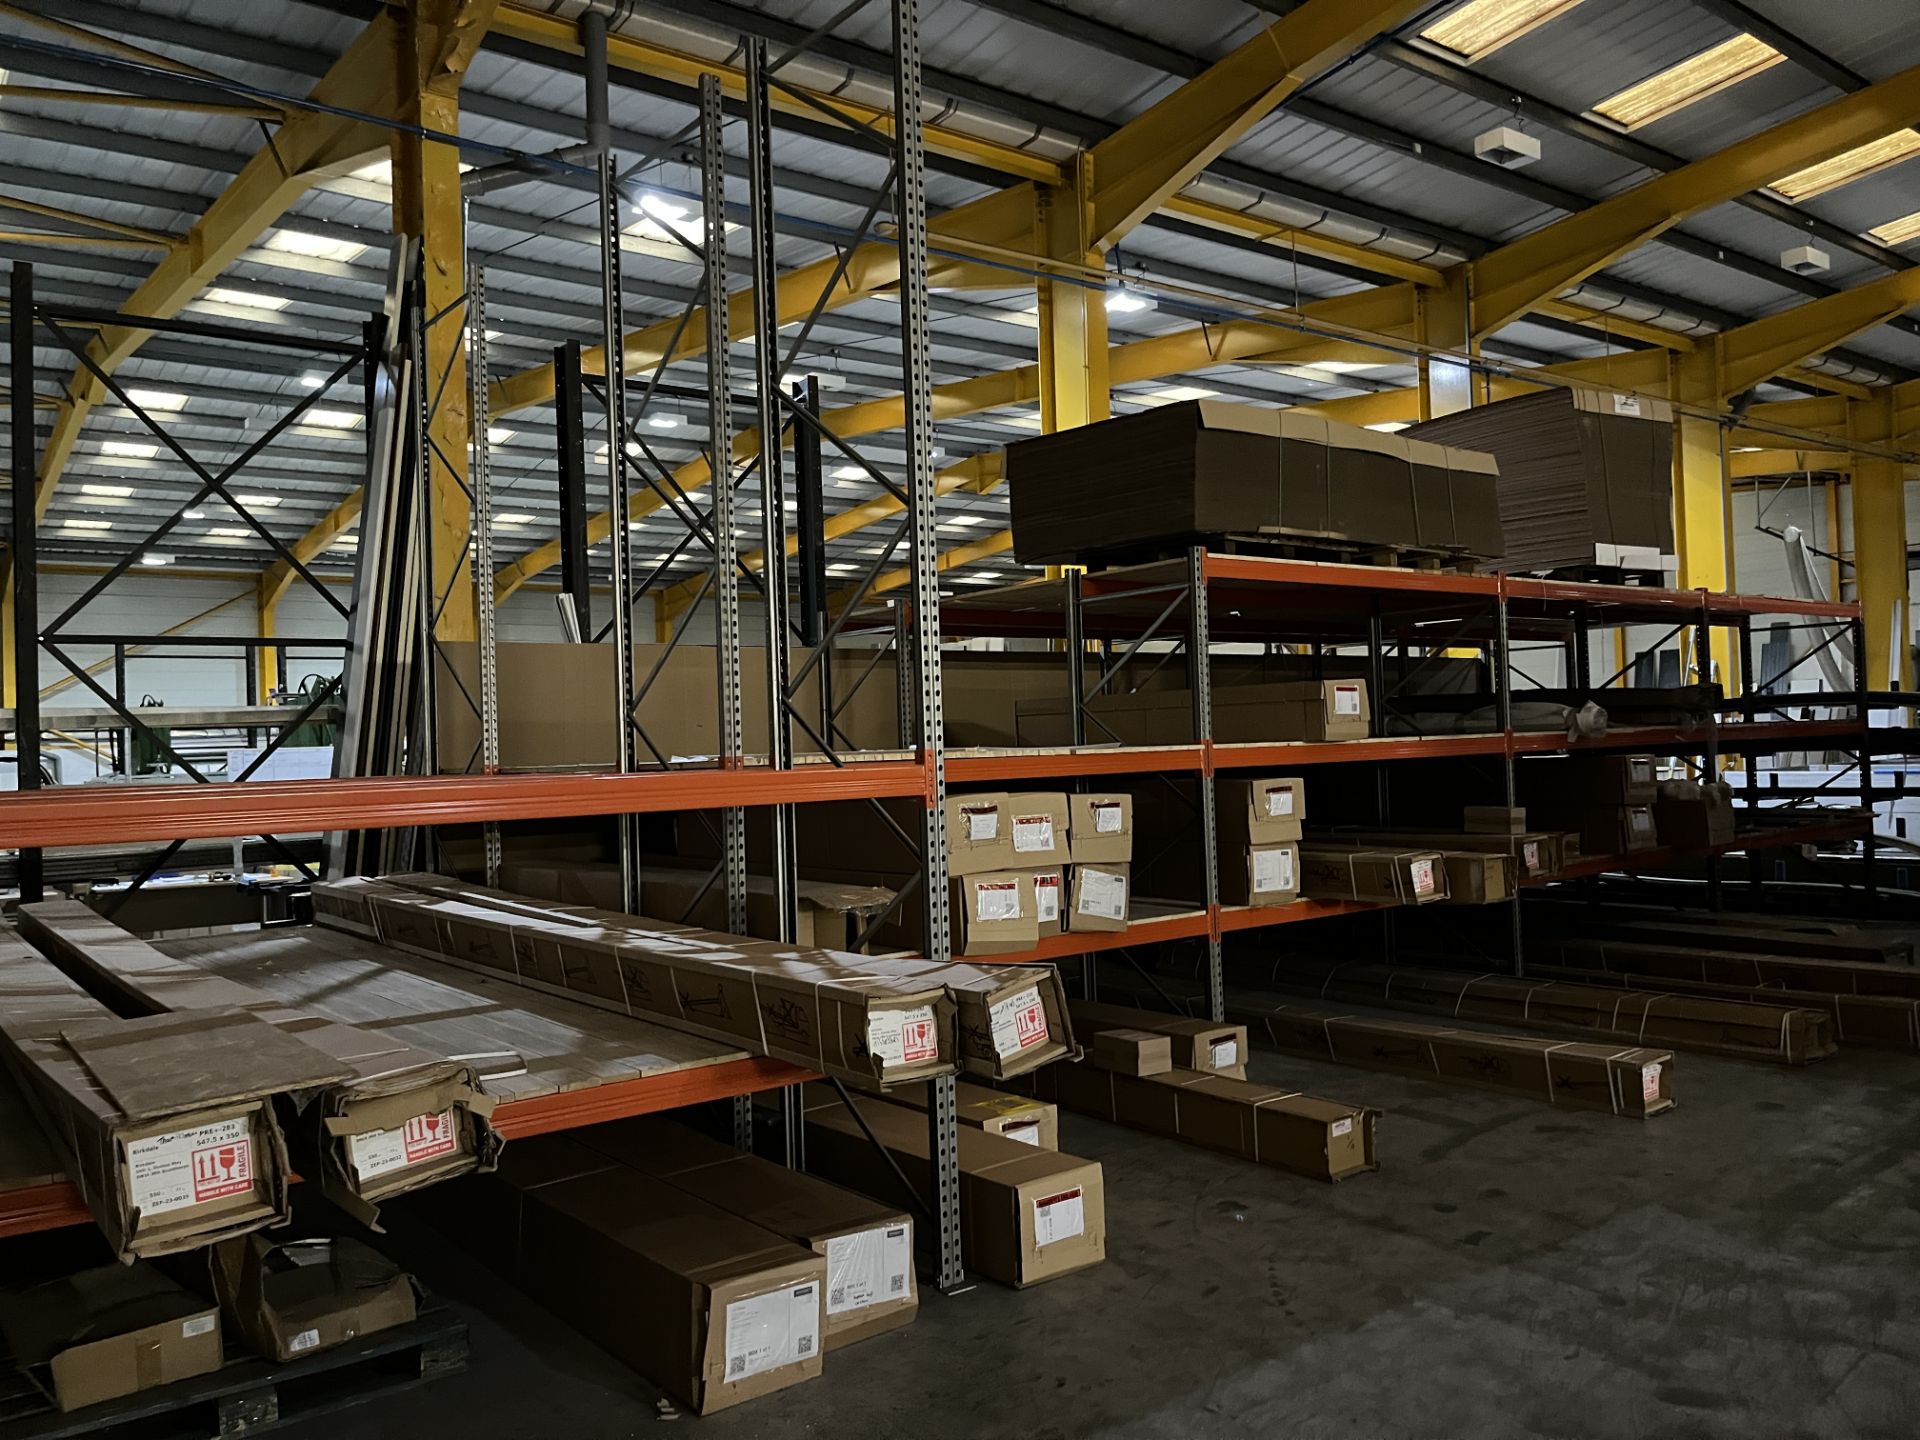 11 Bays of Slotted Steel Racking. - Image 3 of 3